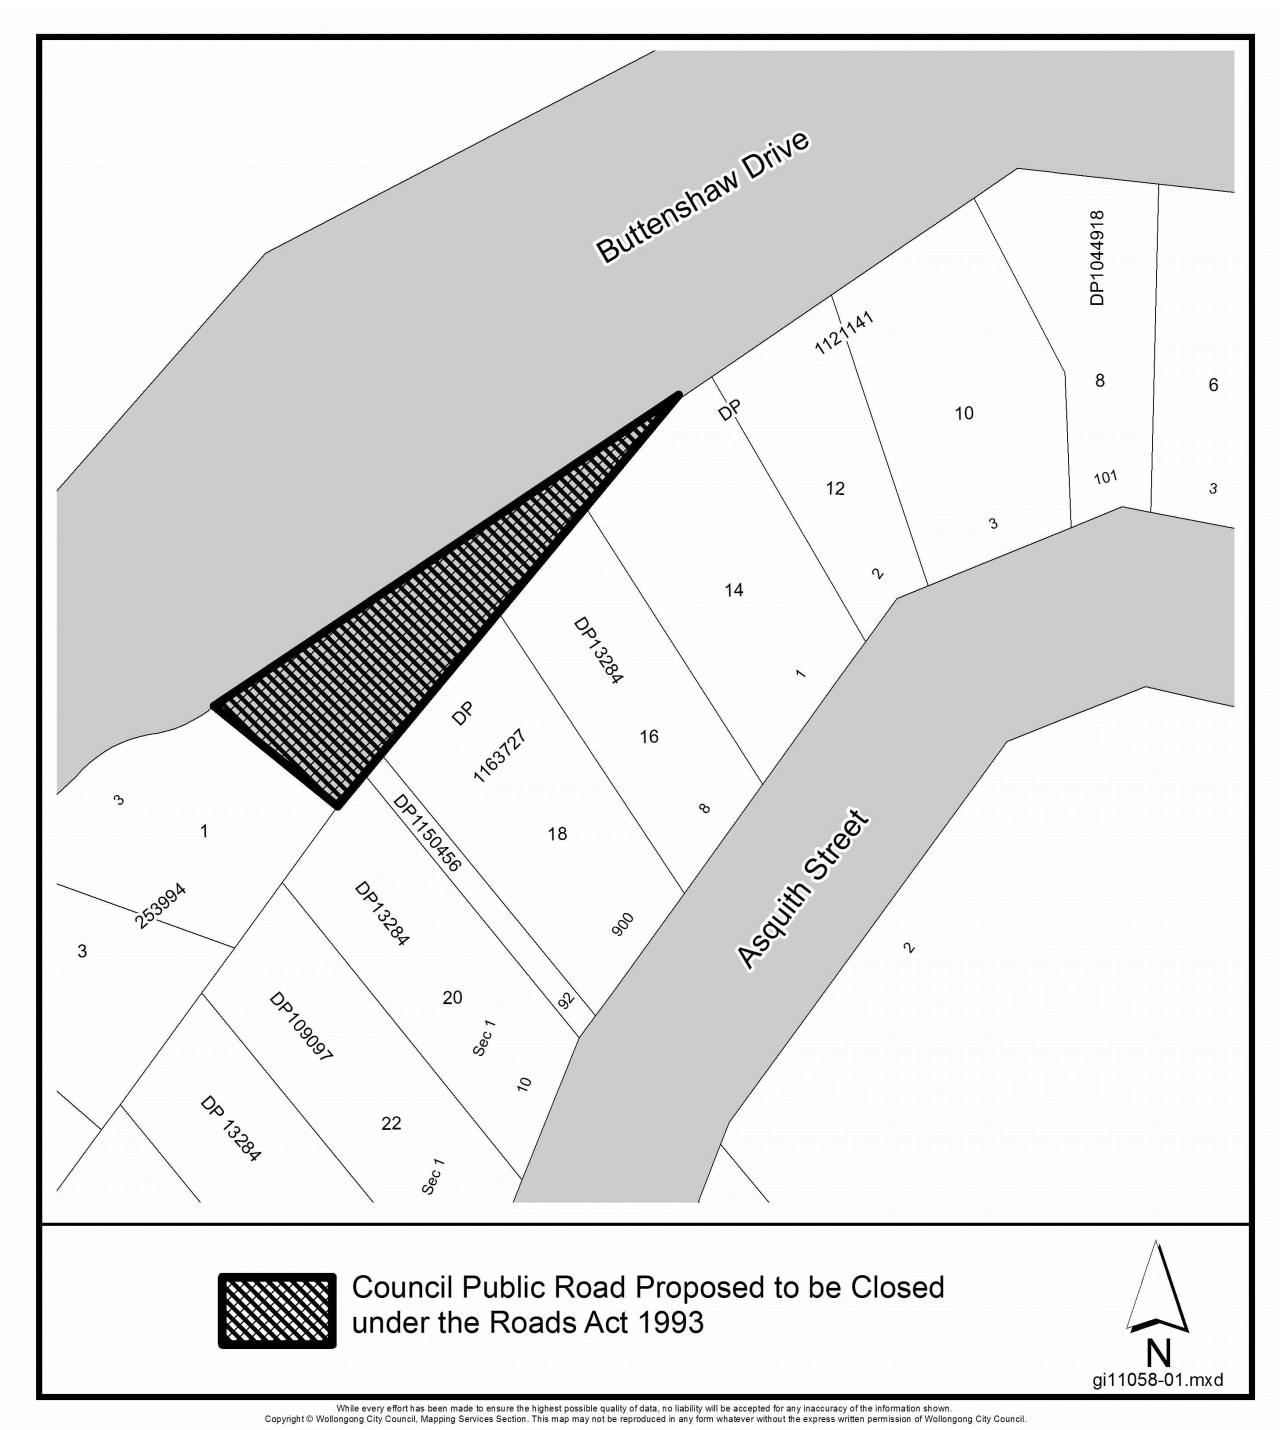 Proposed part closure of Buttenshaw Road